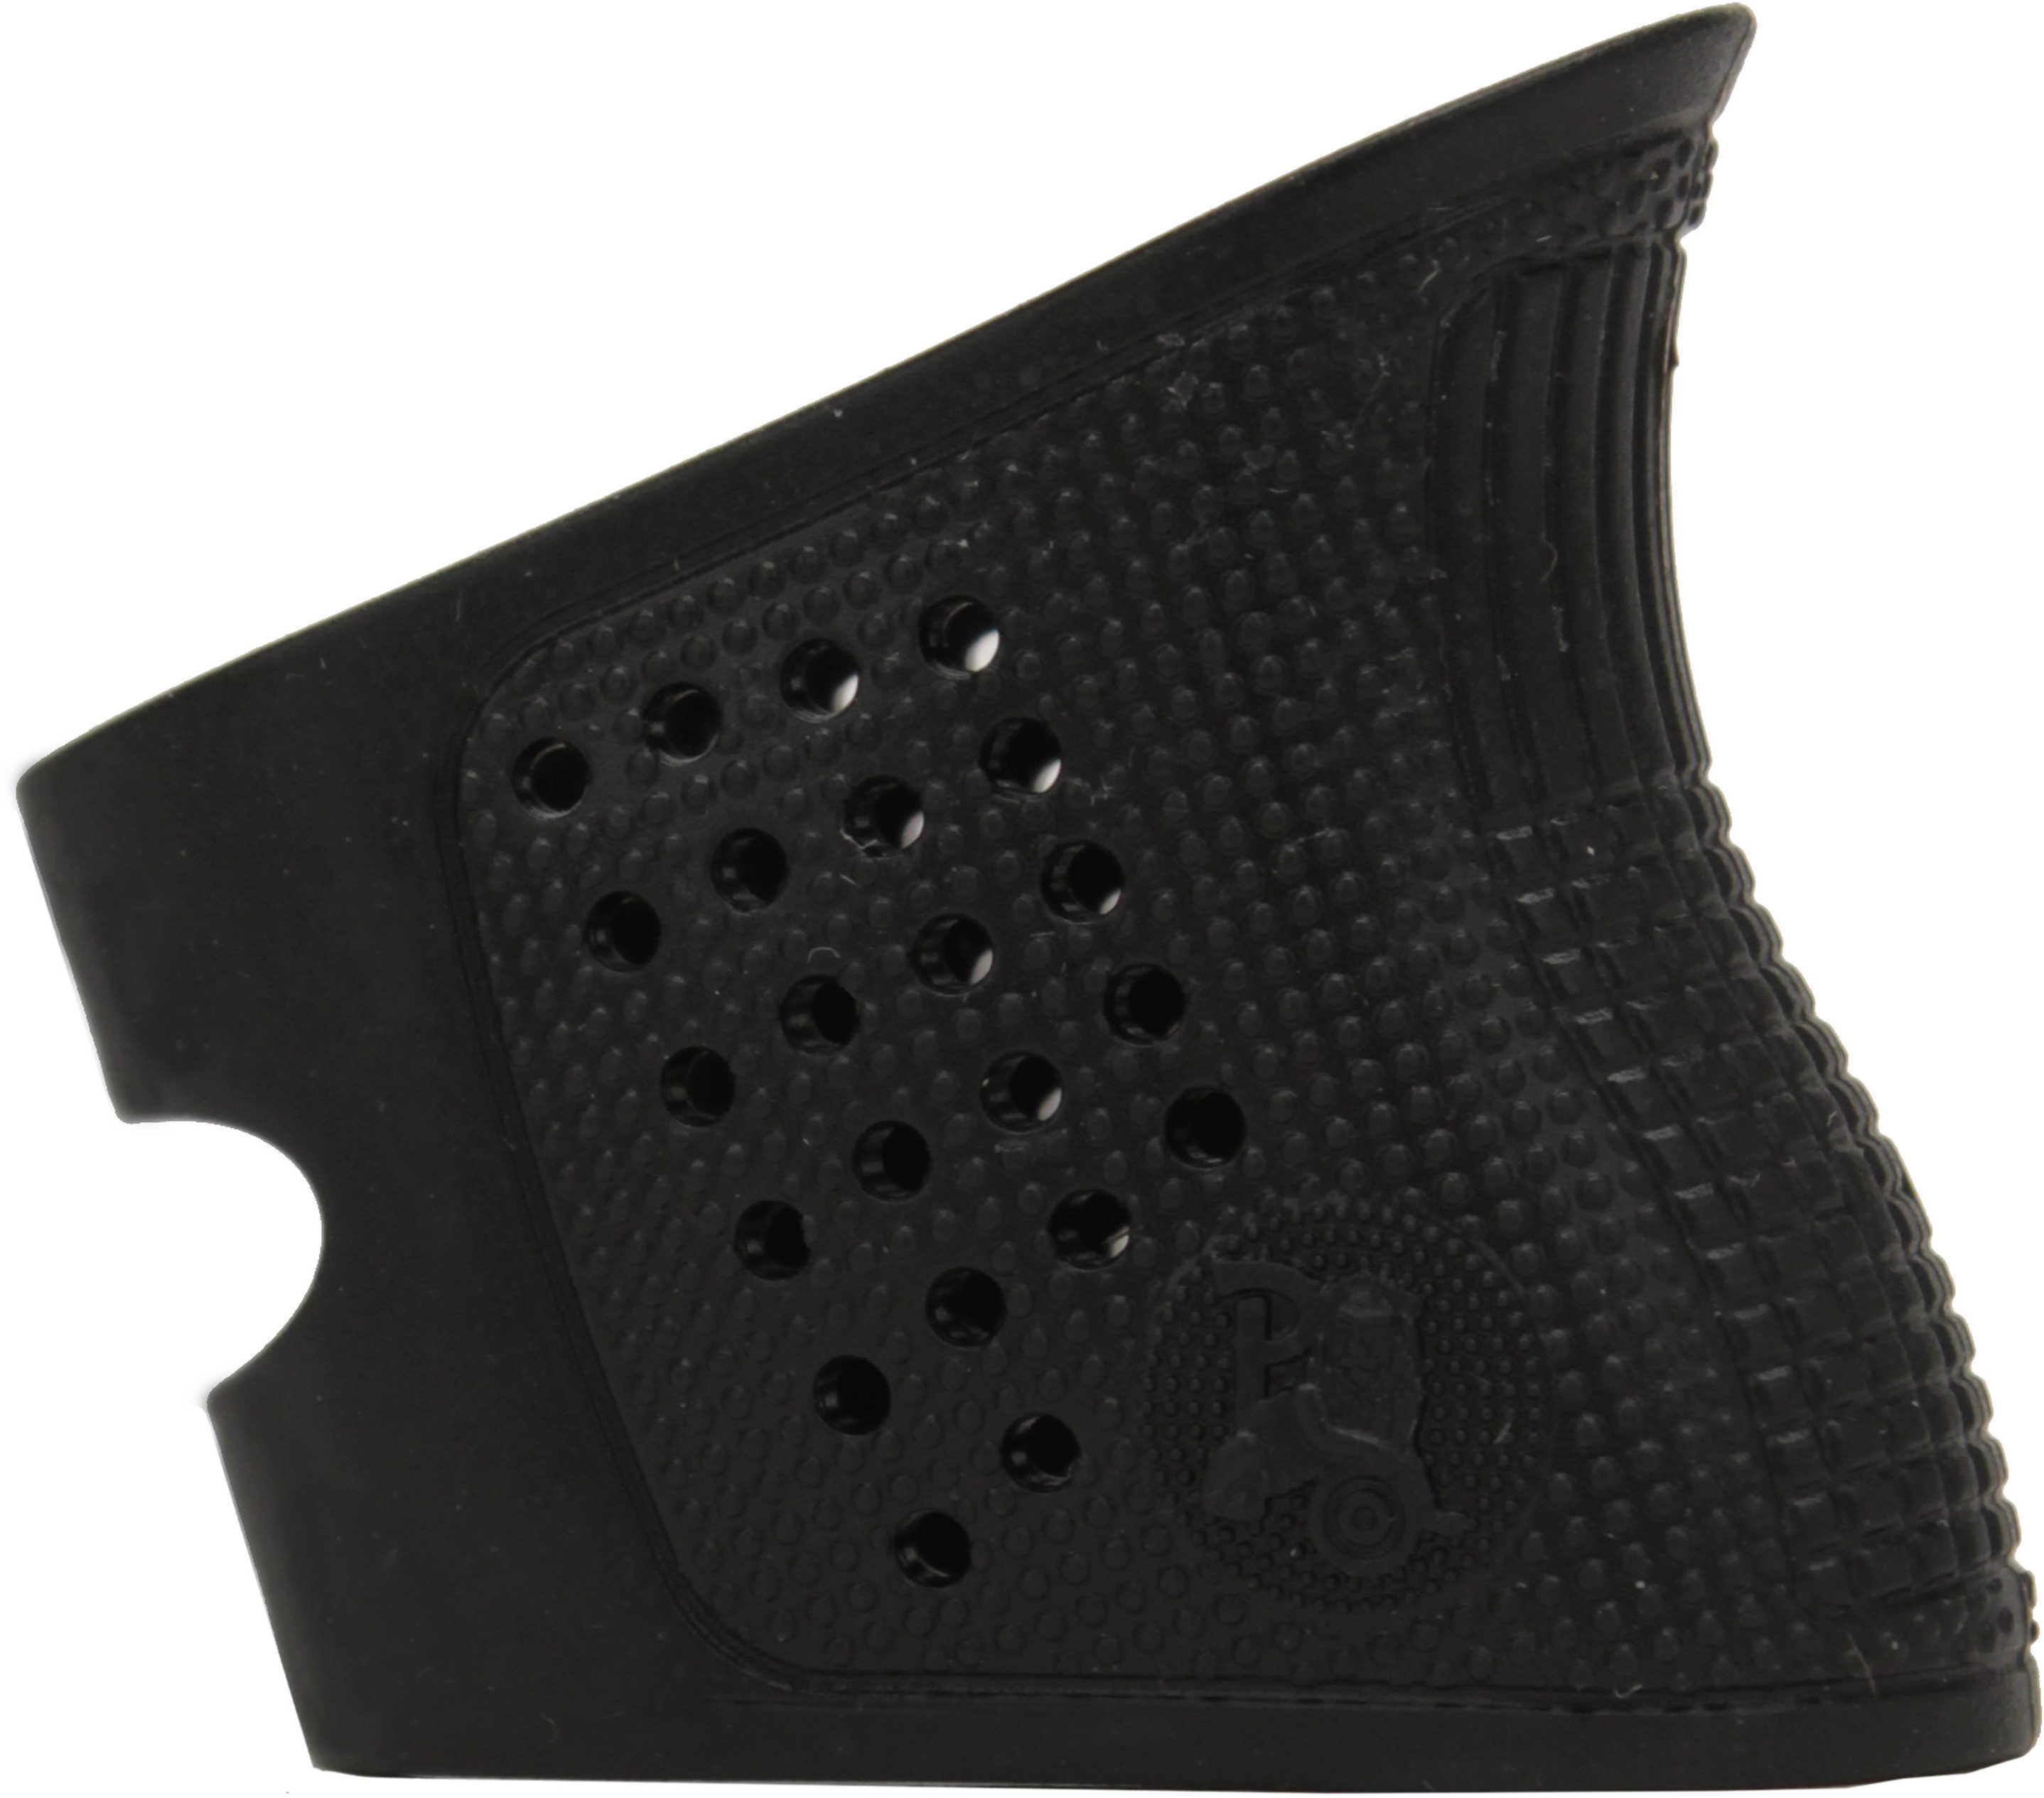 Pachmayr 05175 Gloves Grip for Glock Sub Compact Black Rubber